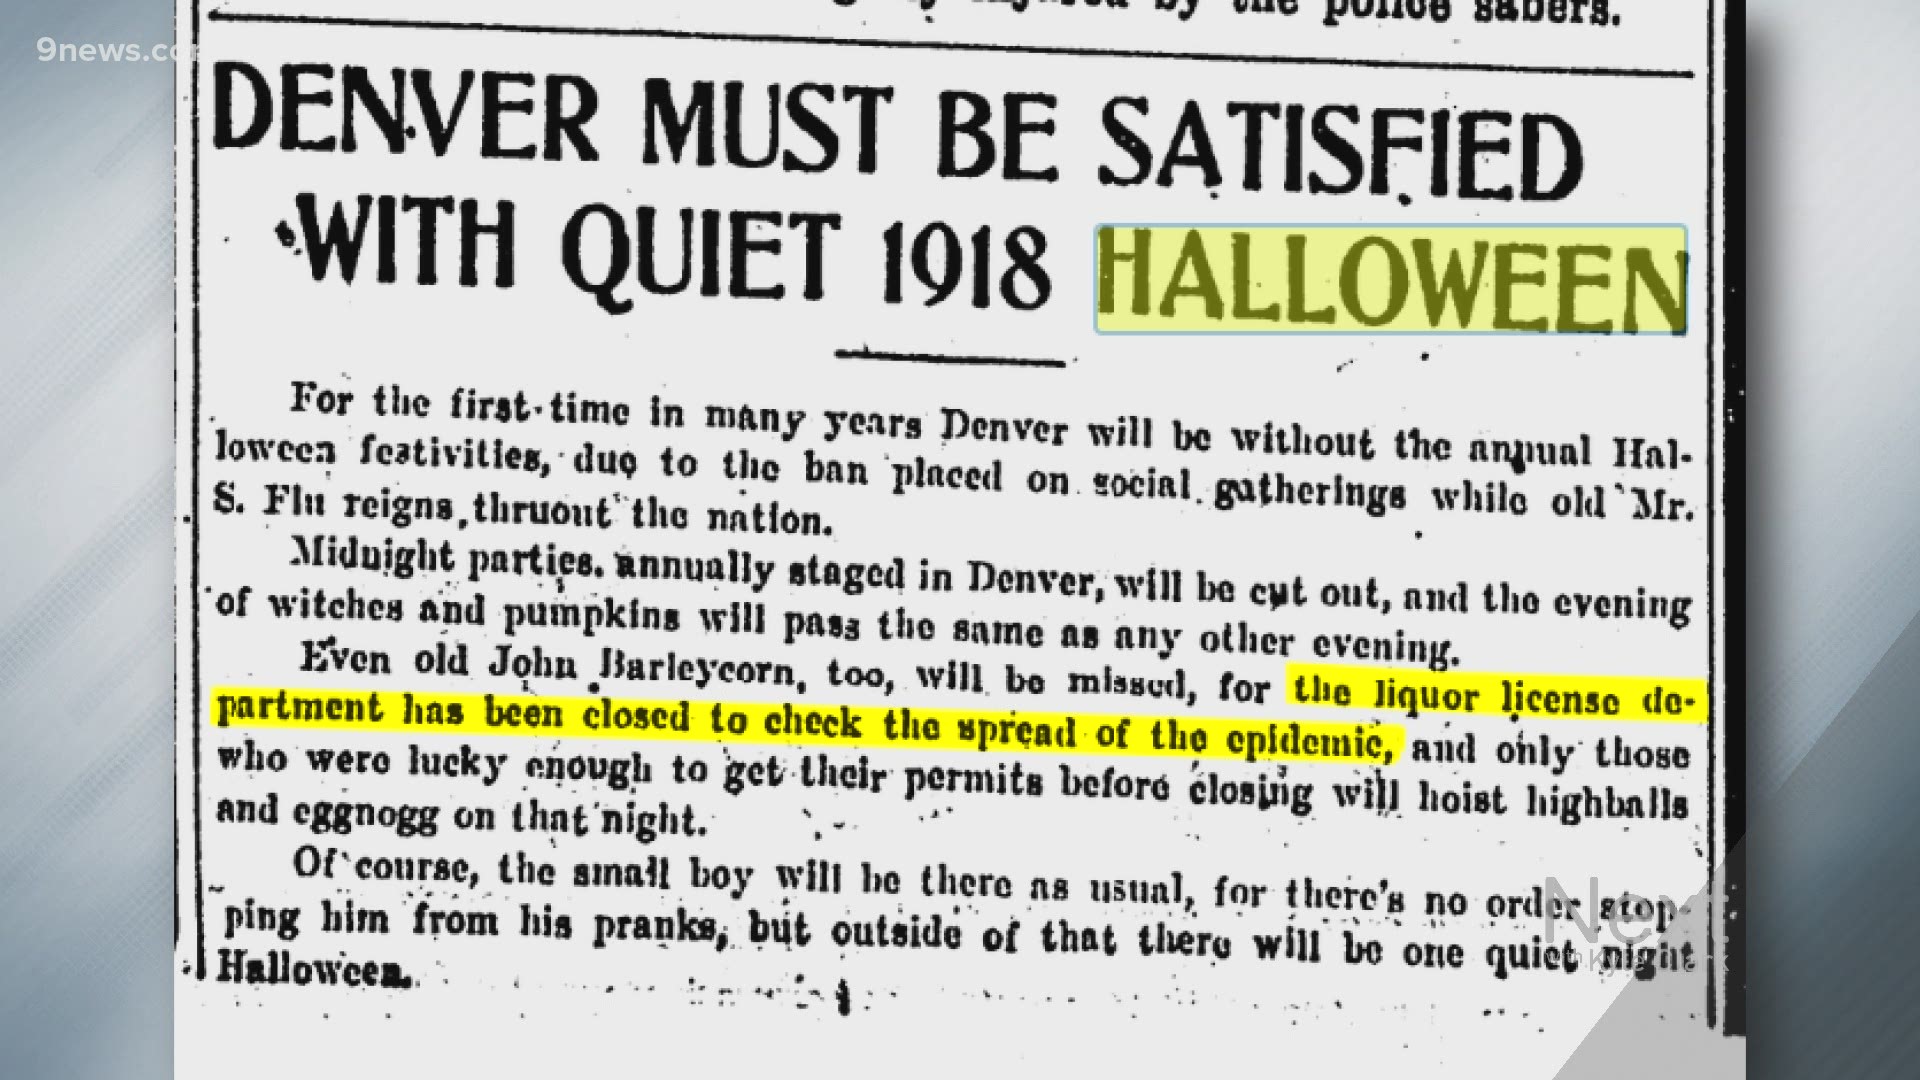 The Mayor of Denver at the time, William Fitz Randolph Mills, placed a ban on all social gatherings in the city for Halloween.